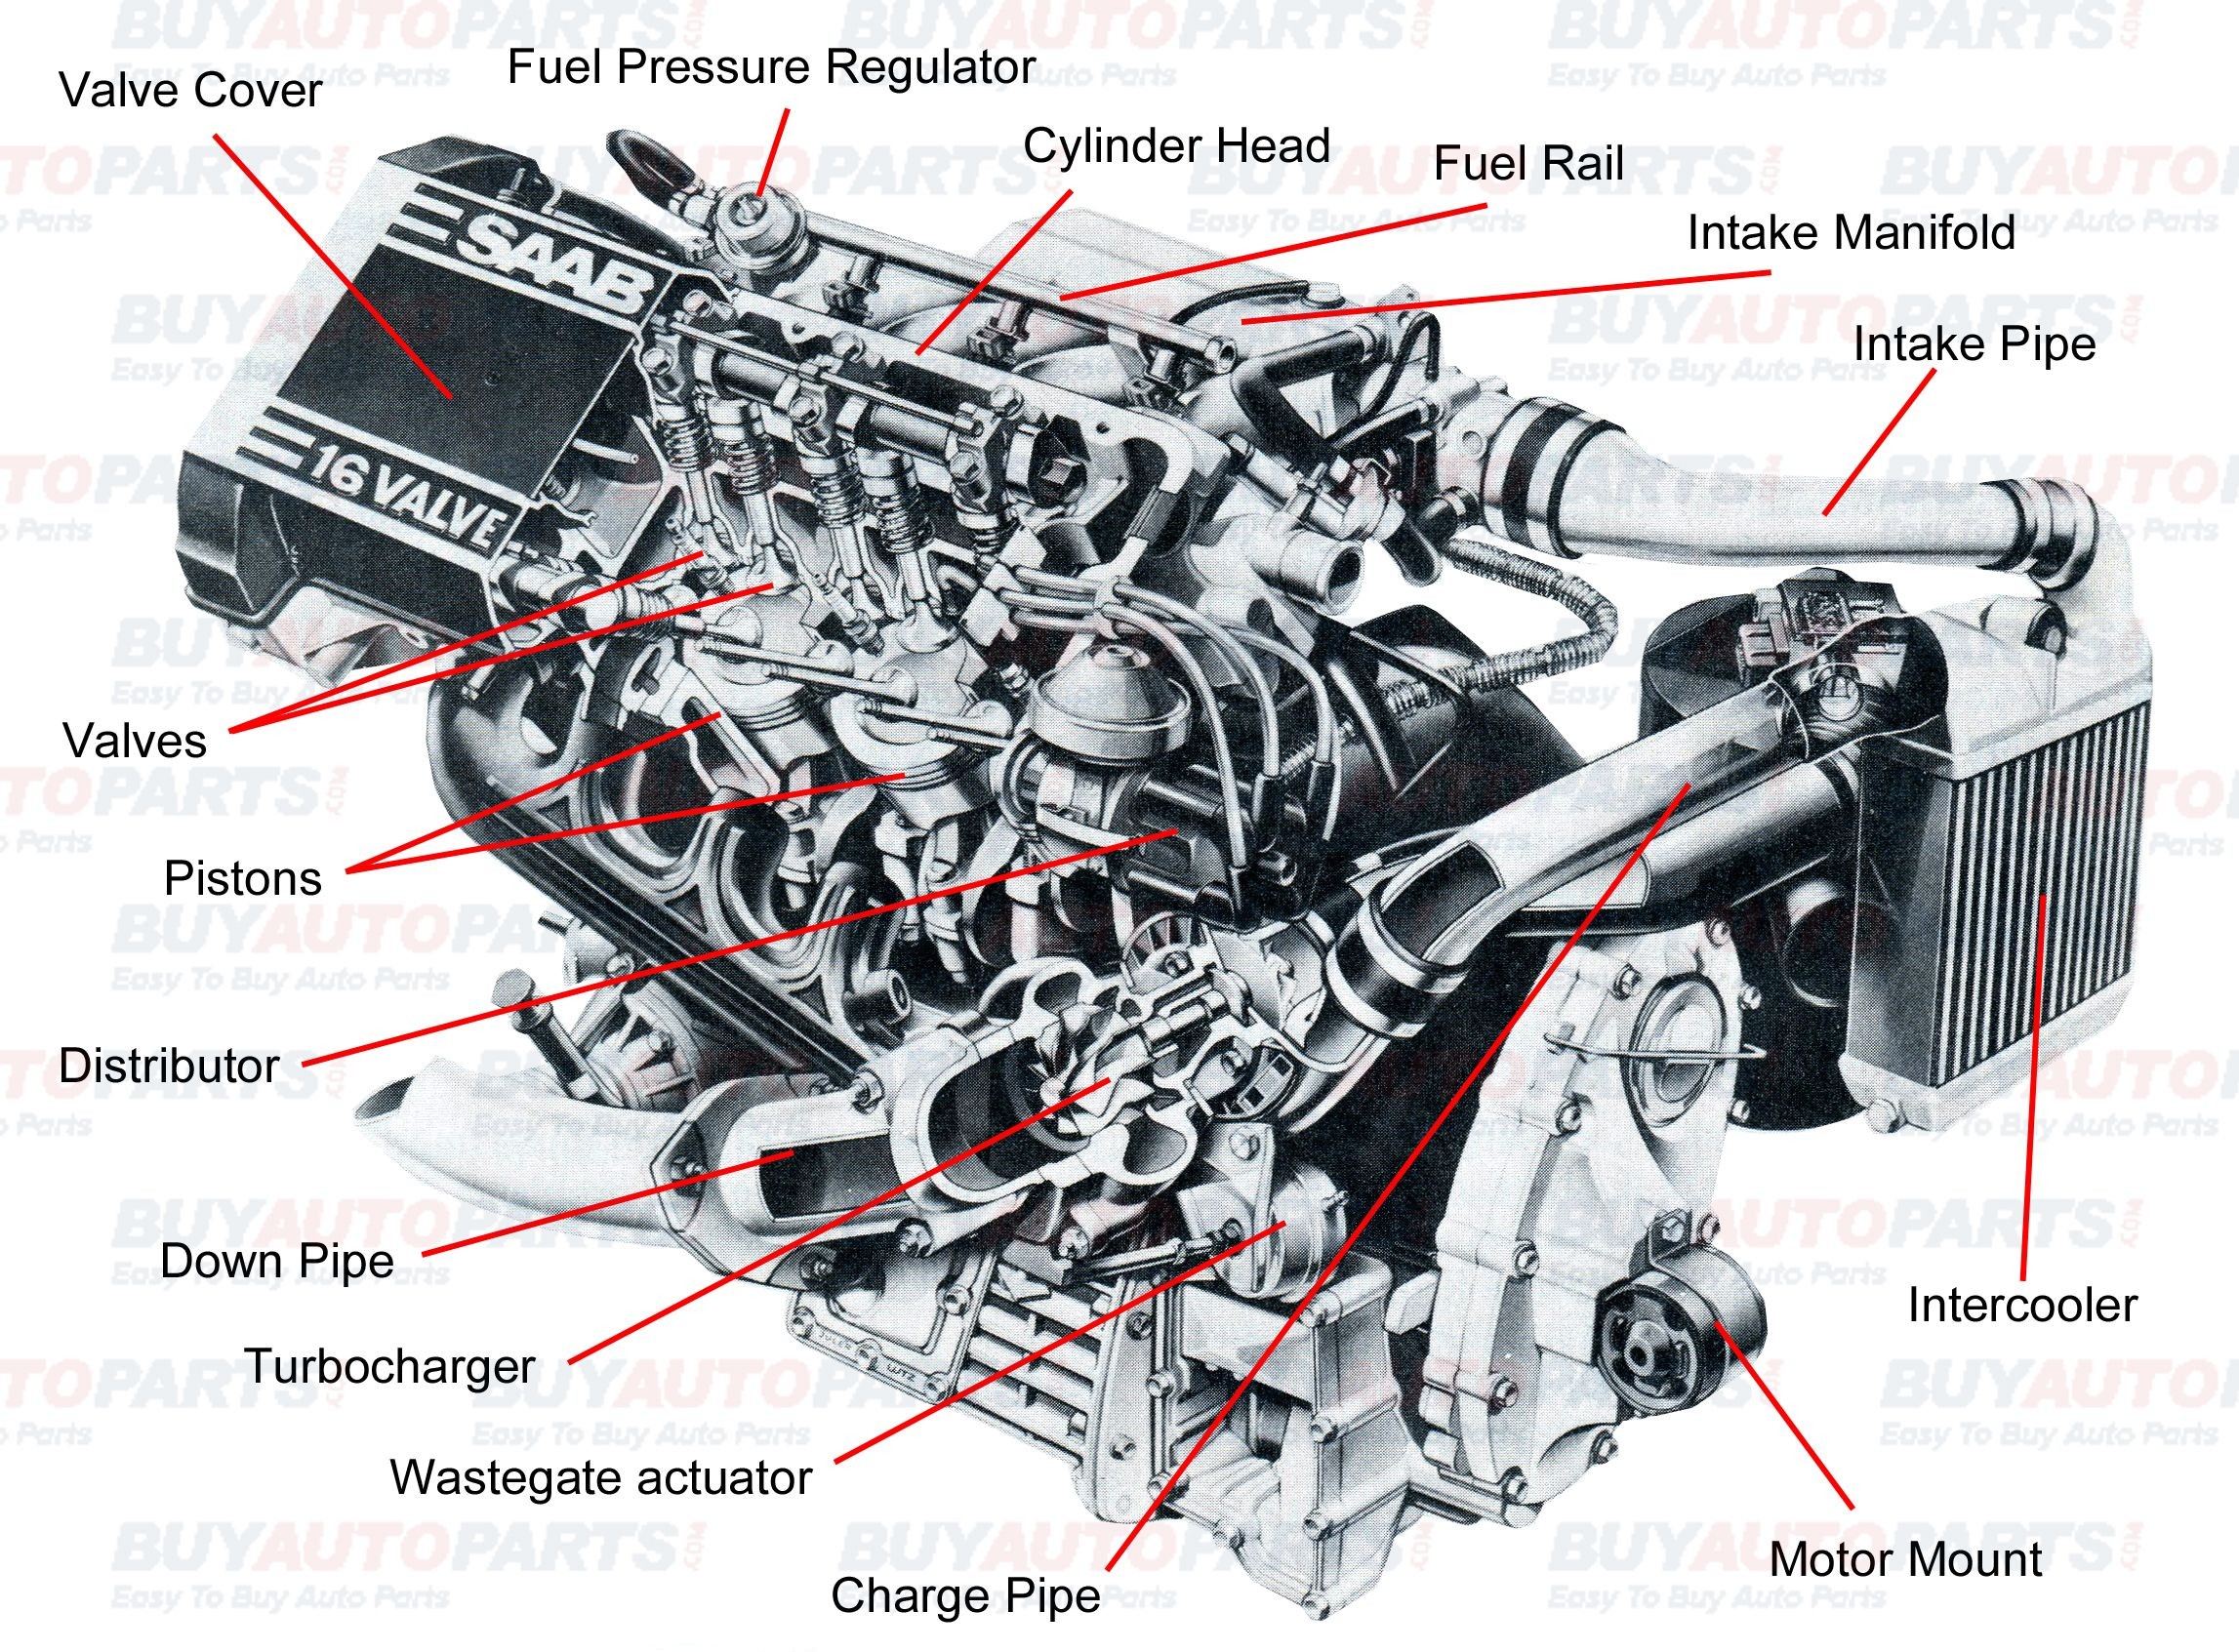 Exploded Car Diagram Pin by Jimmiejanet Testellamwfz On What Does An Engine with Turbo Of Exploded Car Diagram